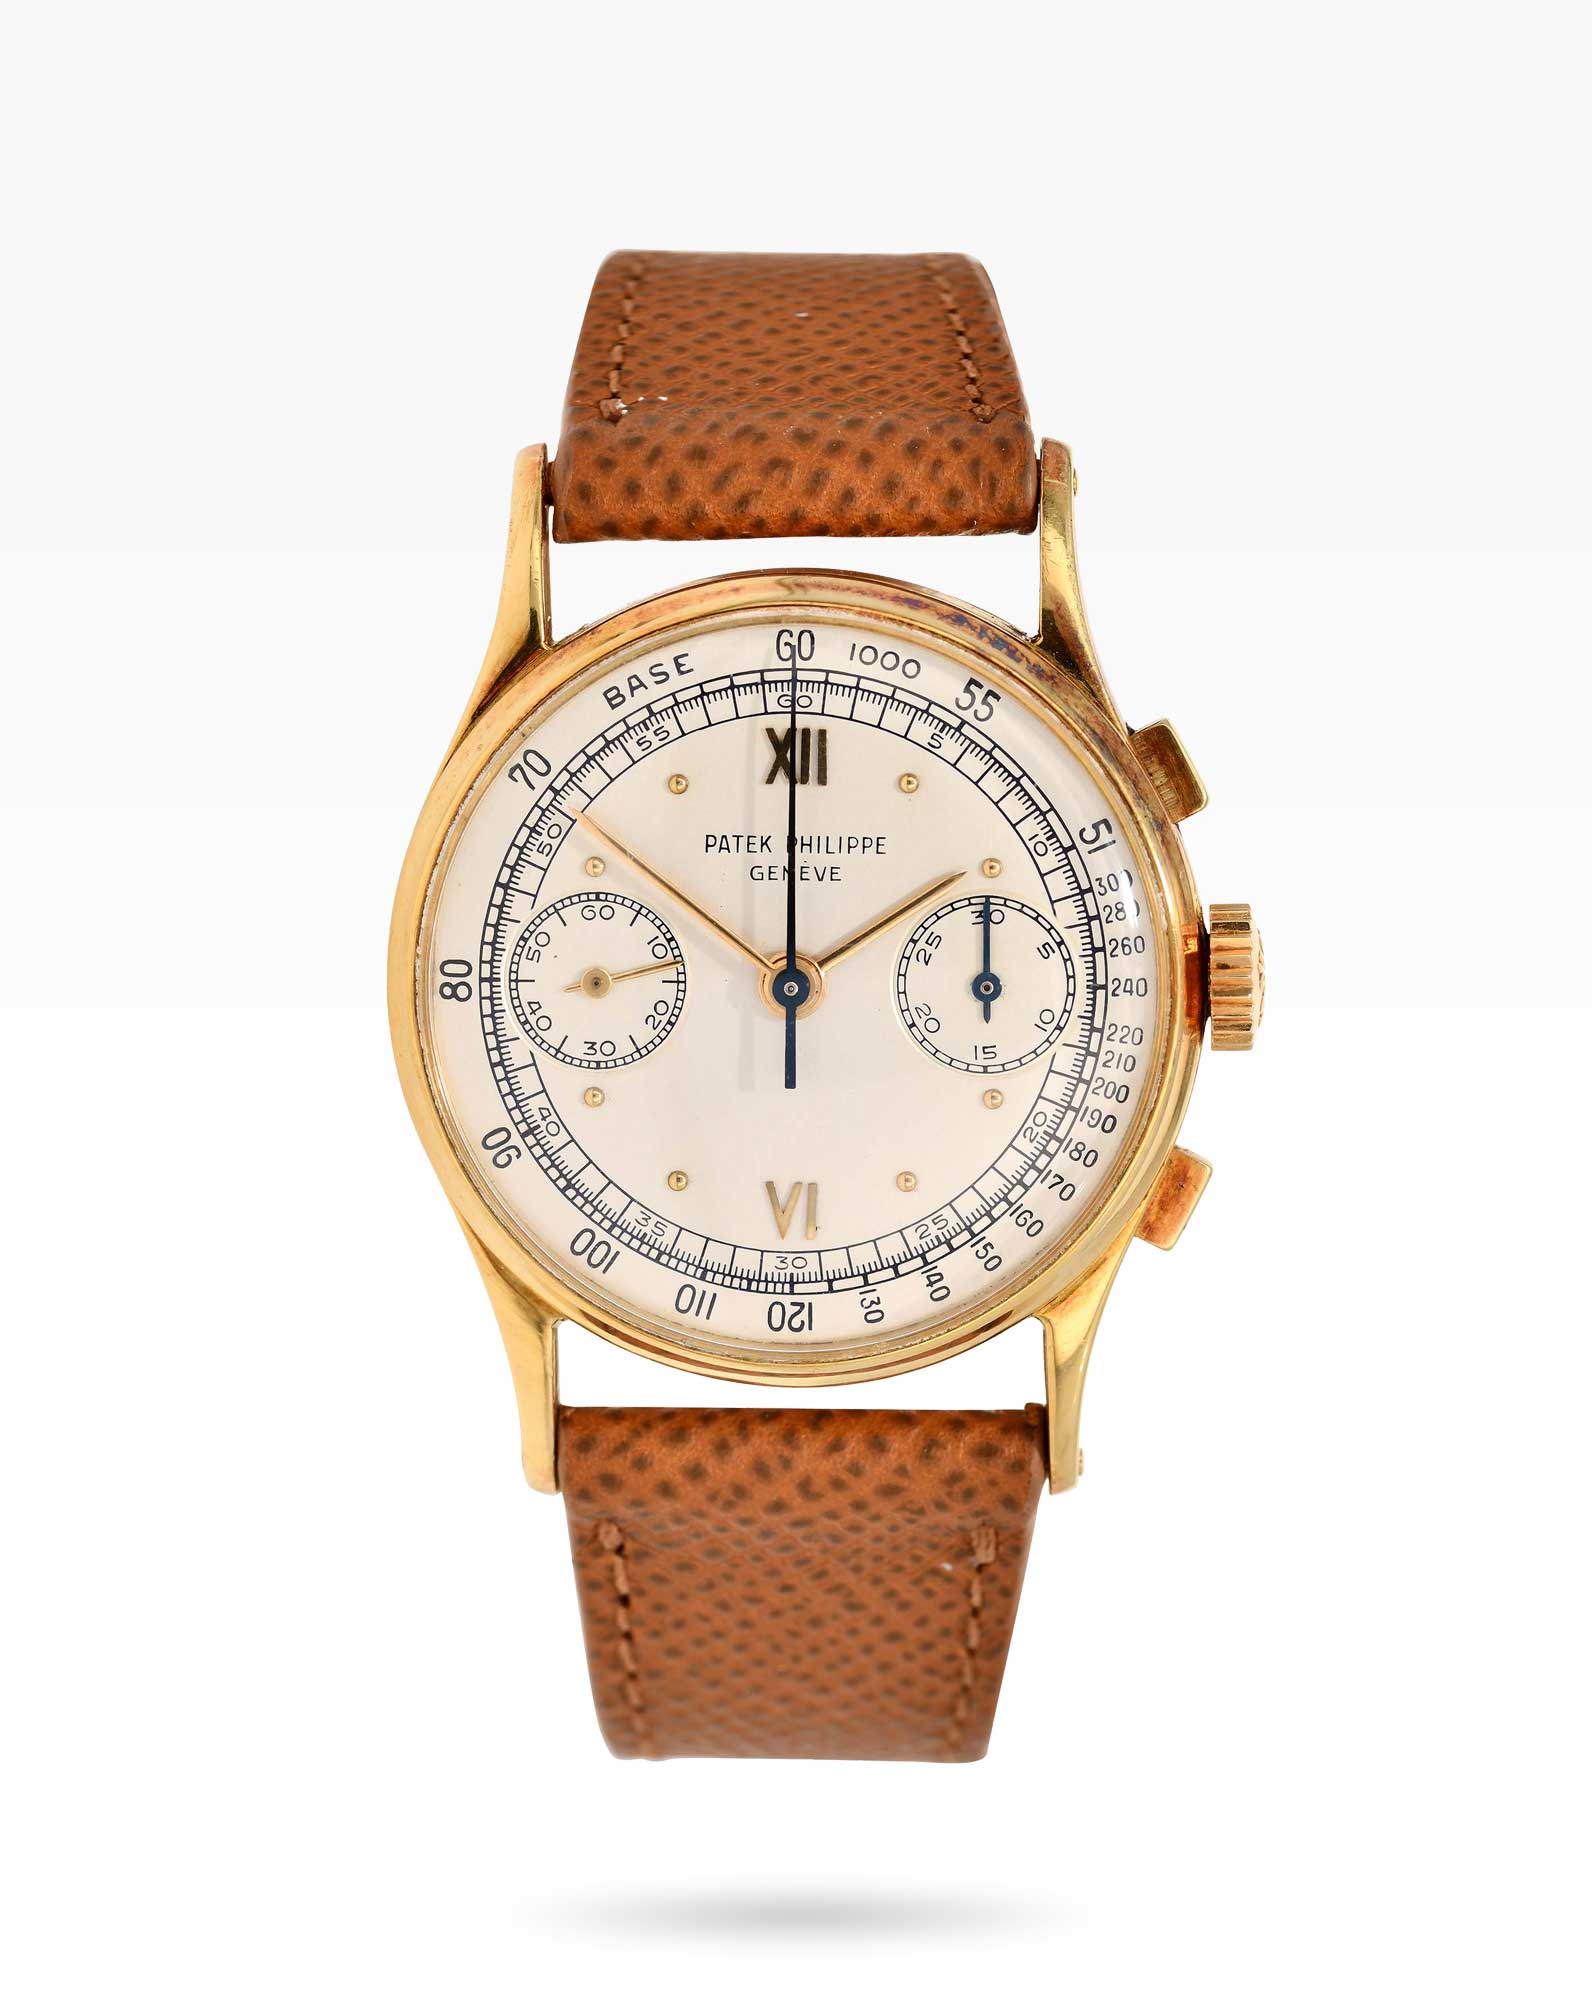 Vintage Patek Philippe Ref.130J (Early Case) Chronograph from 1949 - 2ToneVintage Watches